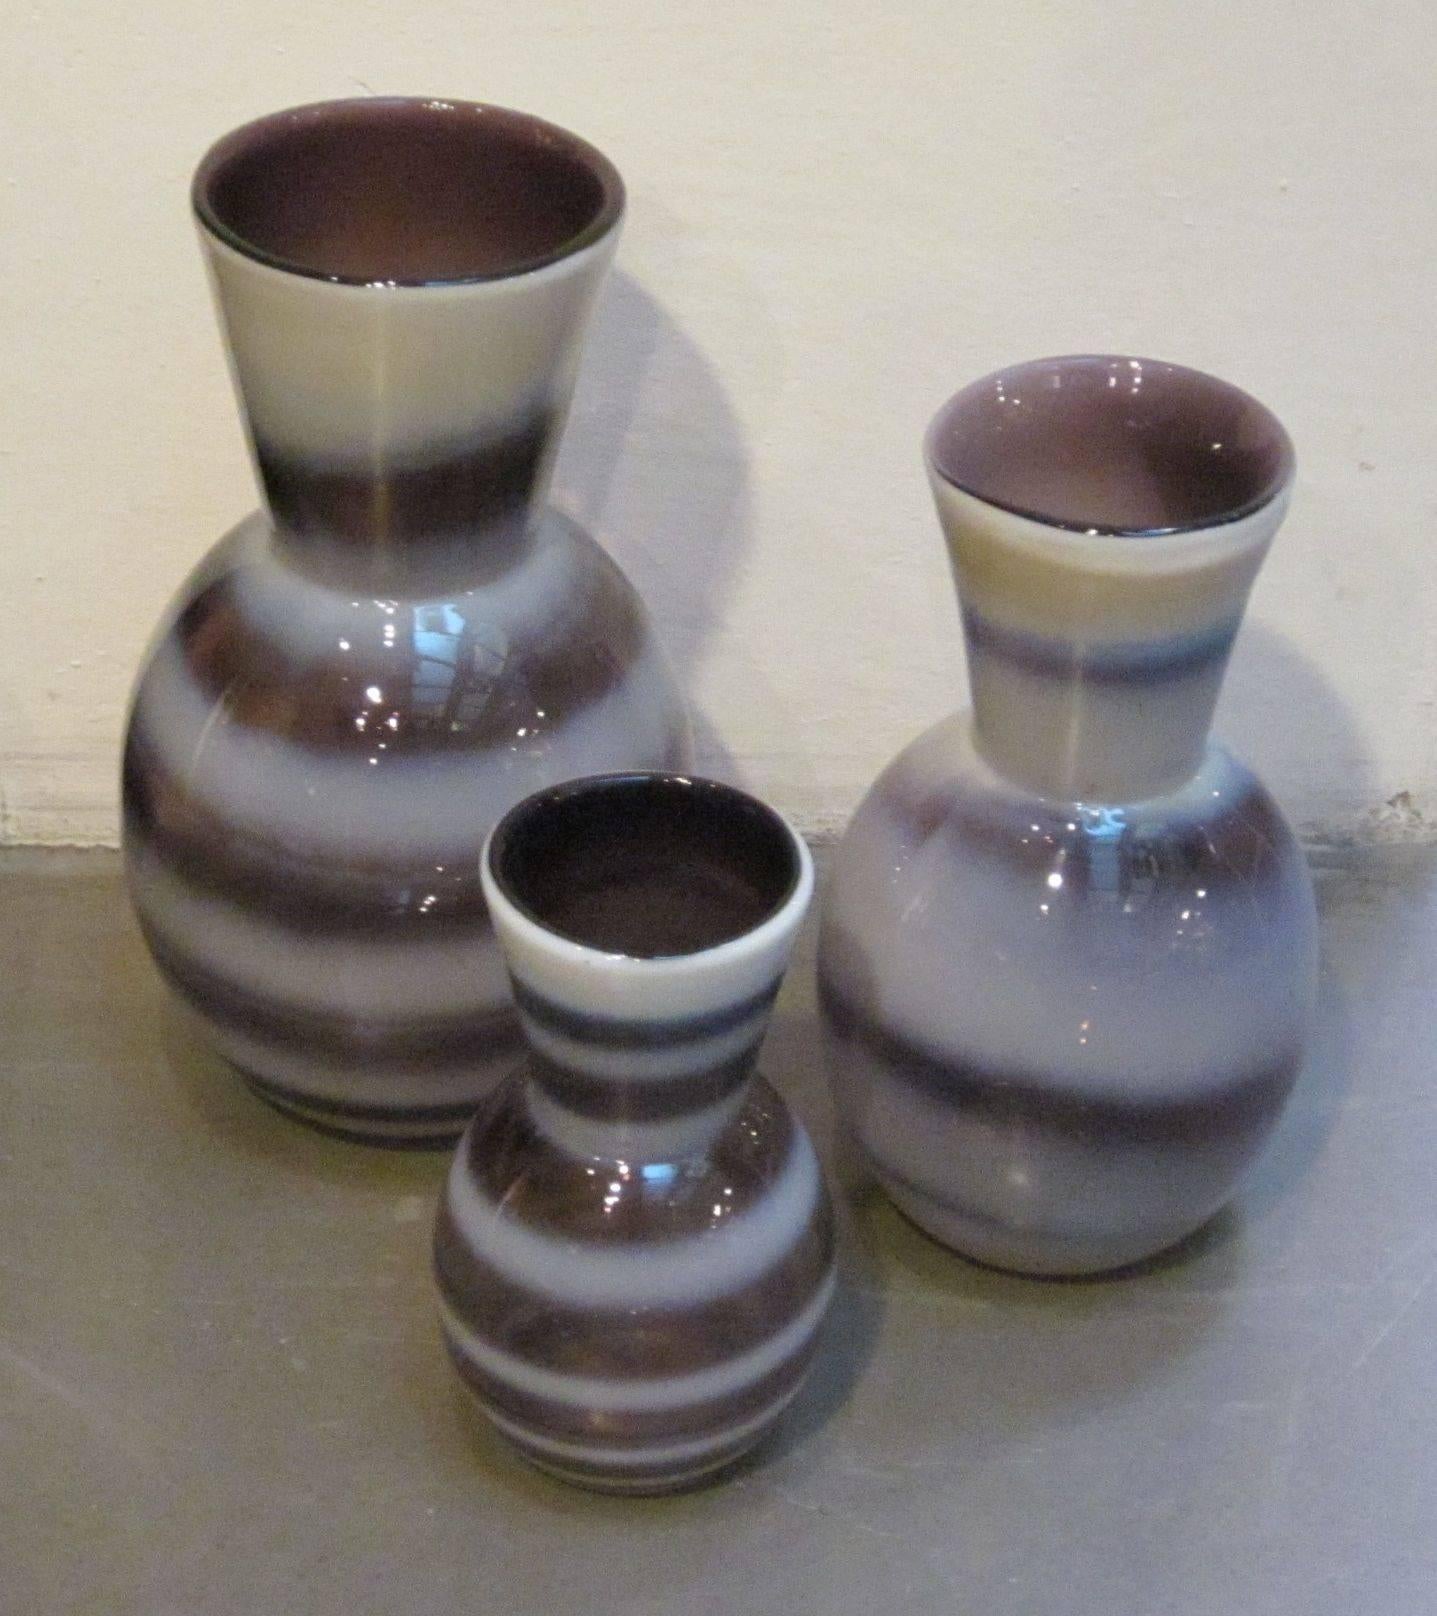 Contemporary Chinese set of three purple and white horizontal stripe glass vases.
Each vase is a different size and stripe pattern.
Sizes are 4